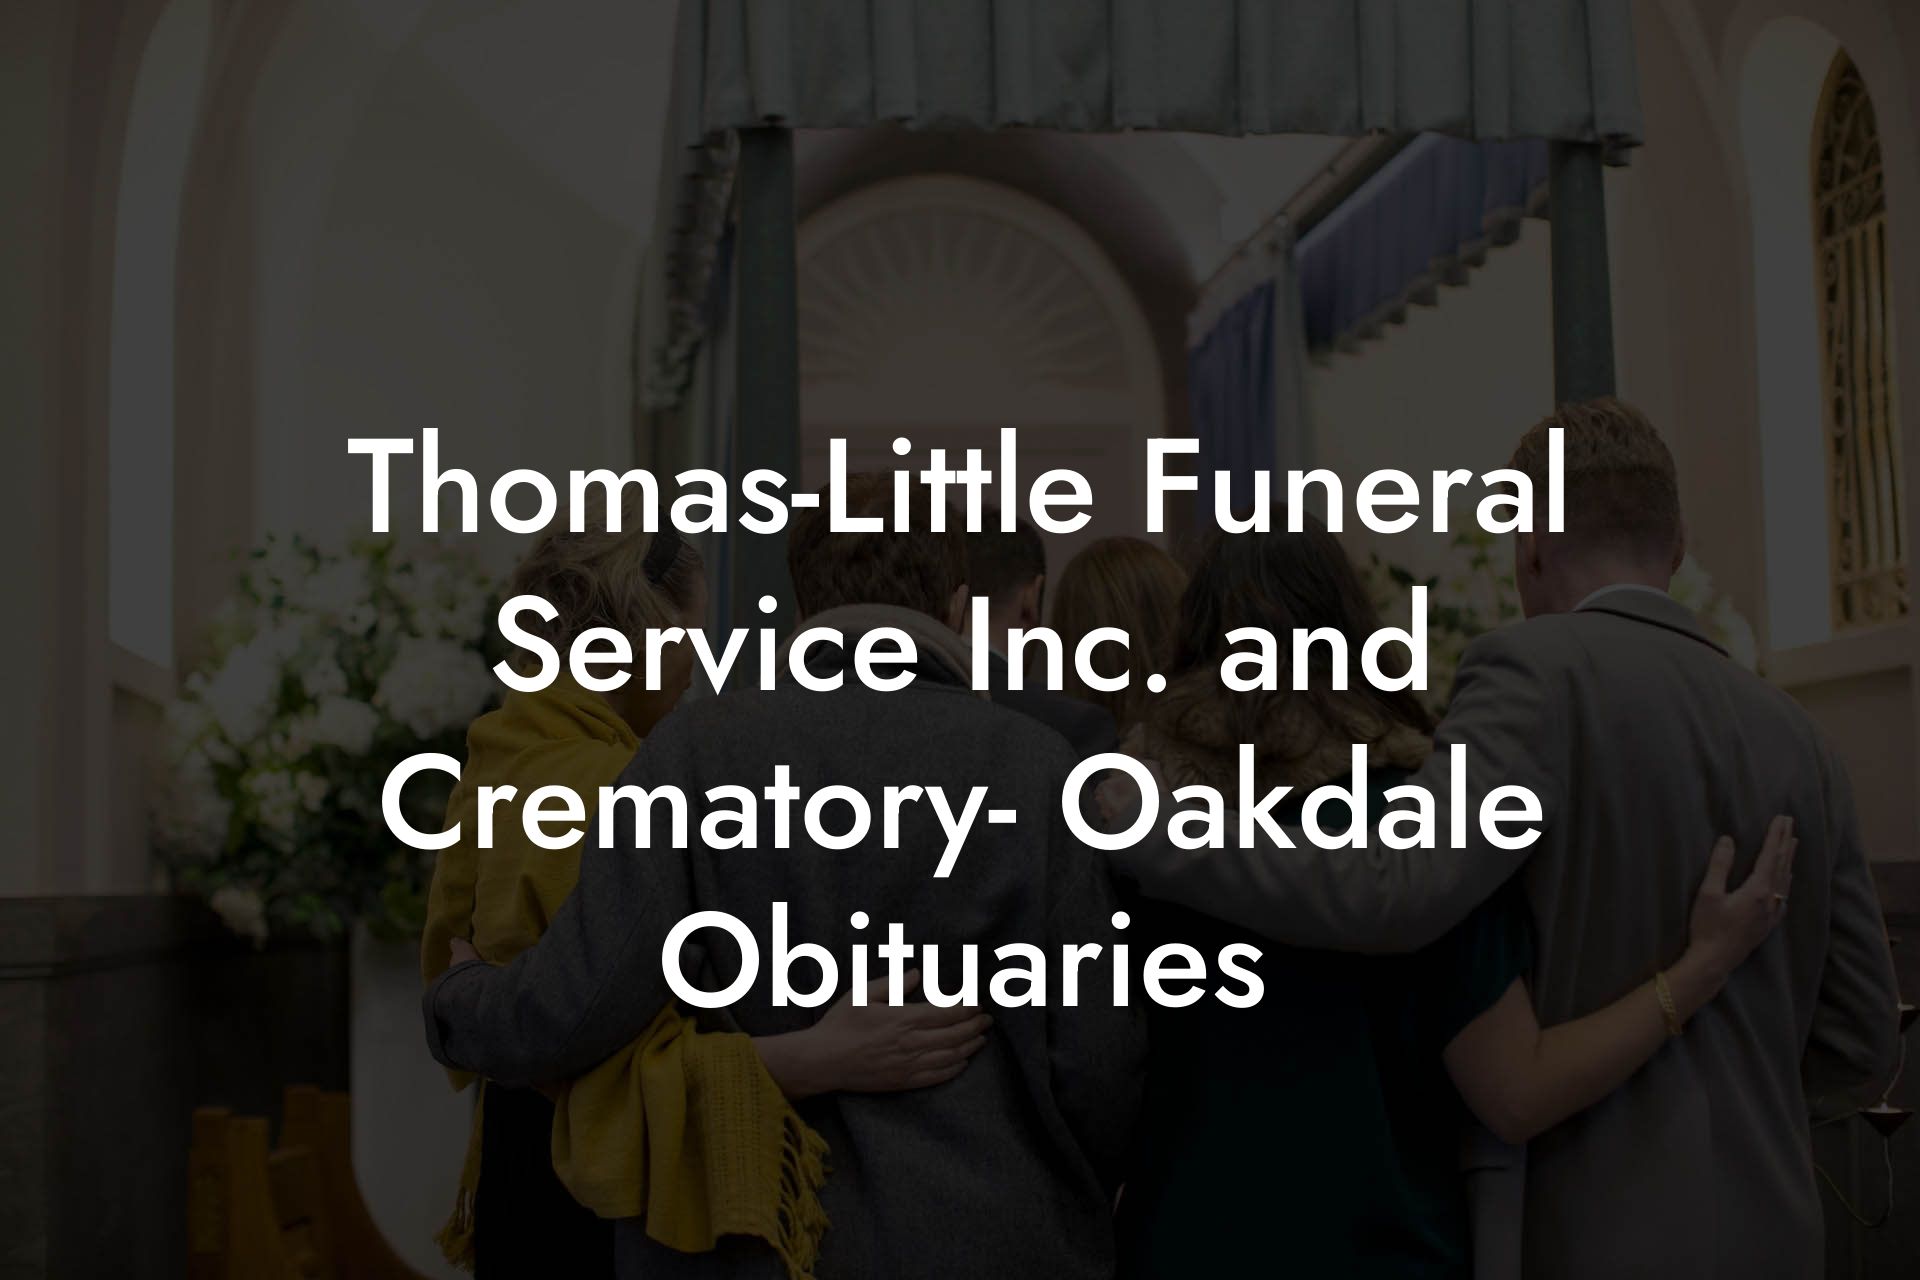 Thomas-Little Funeral Service Inc. and Crematory- Oakdale Obituaries